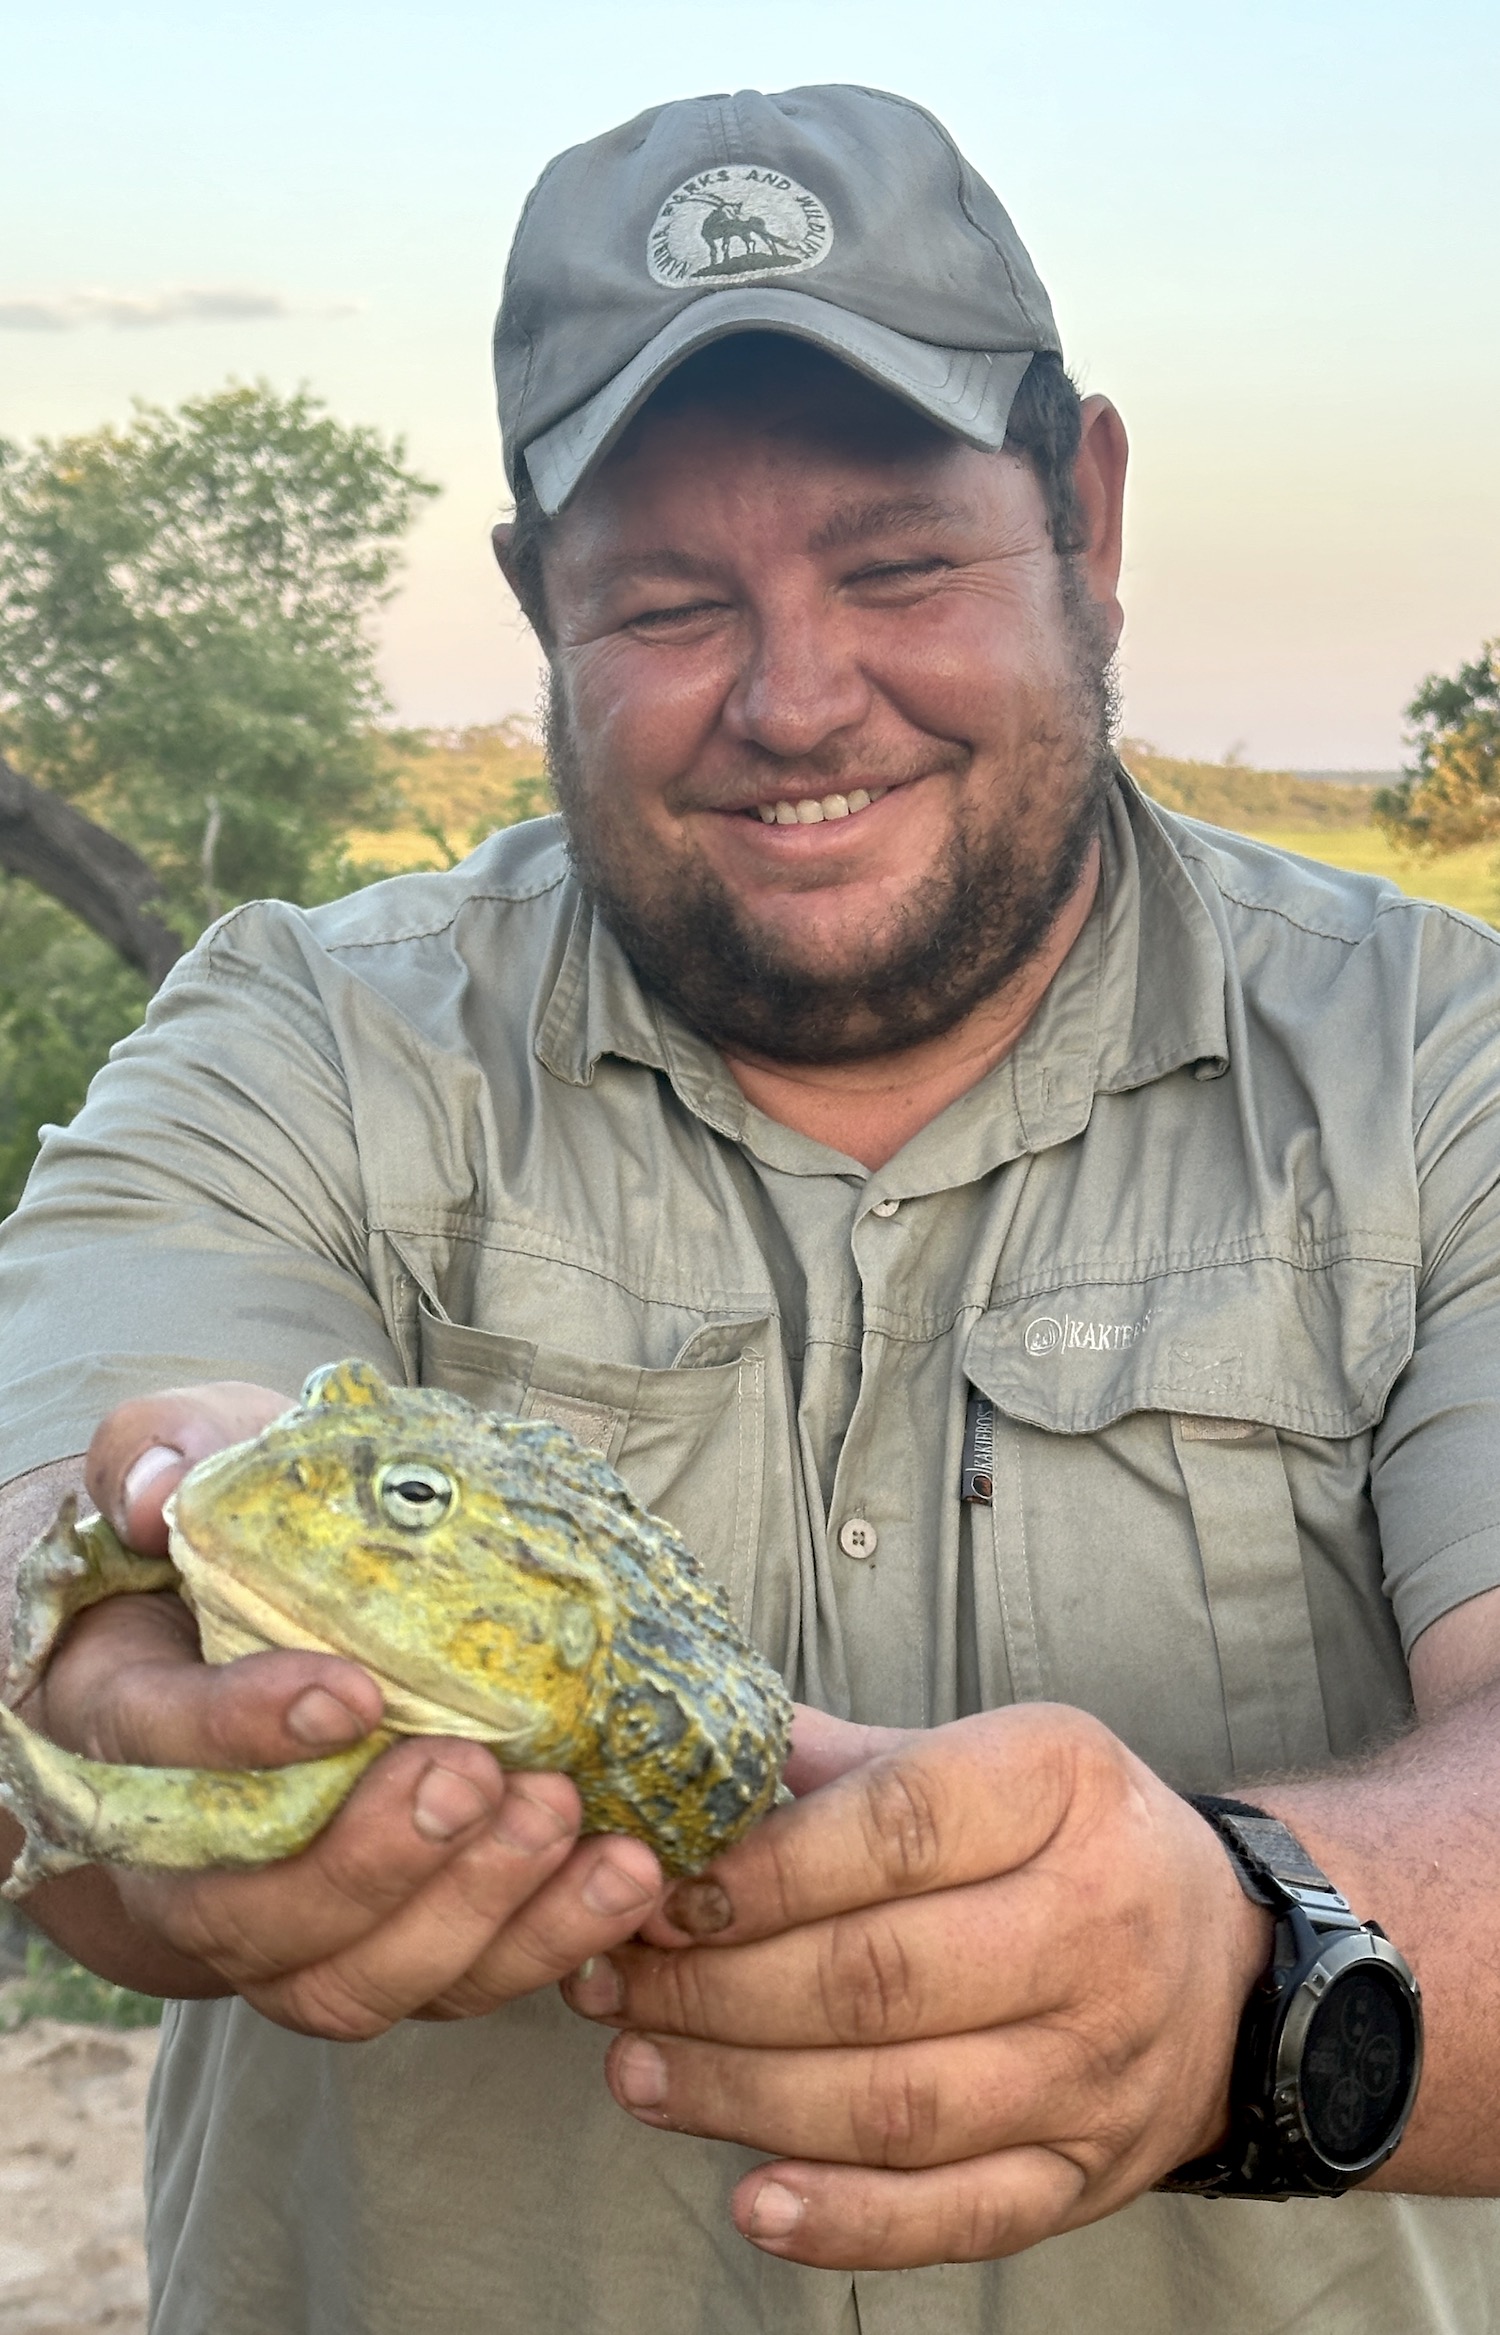 Bearded and smiling, Piet Beytell holds a Beytell's bullfrog.